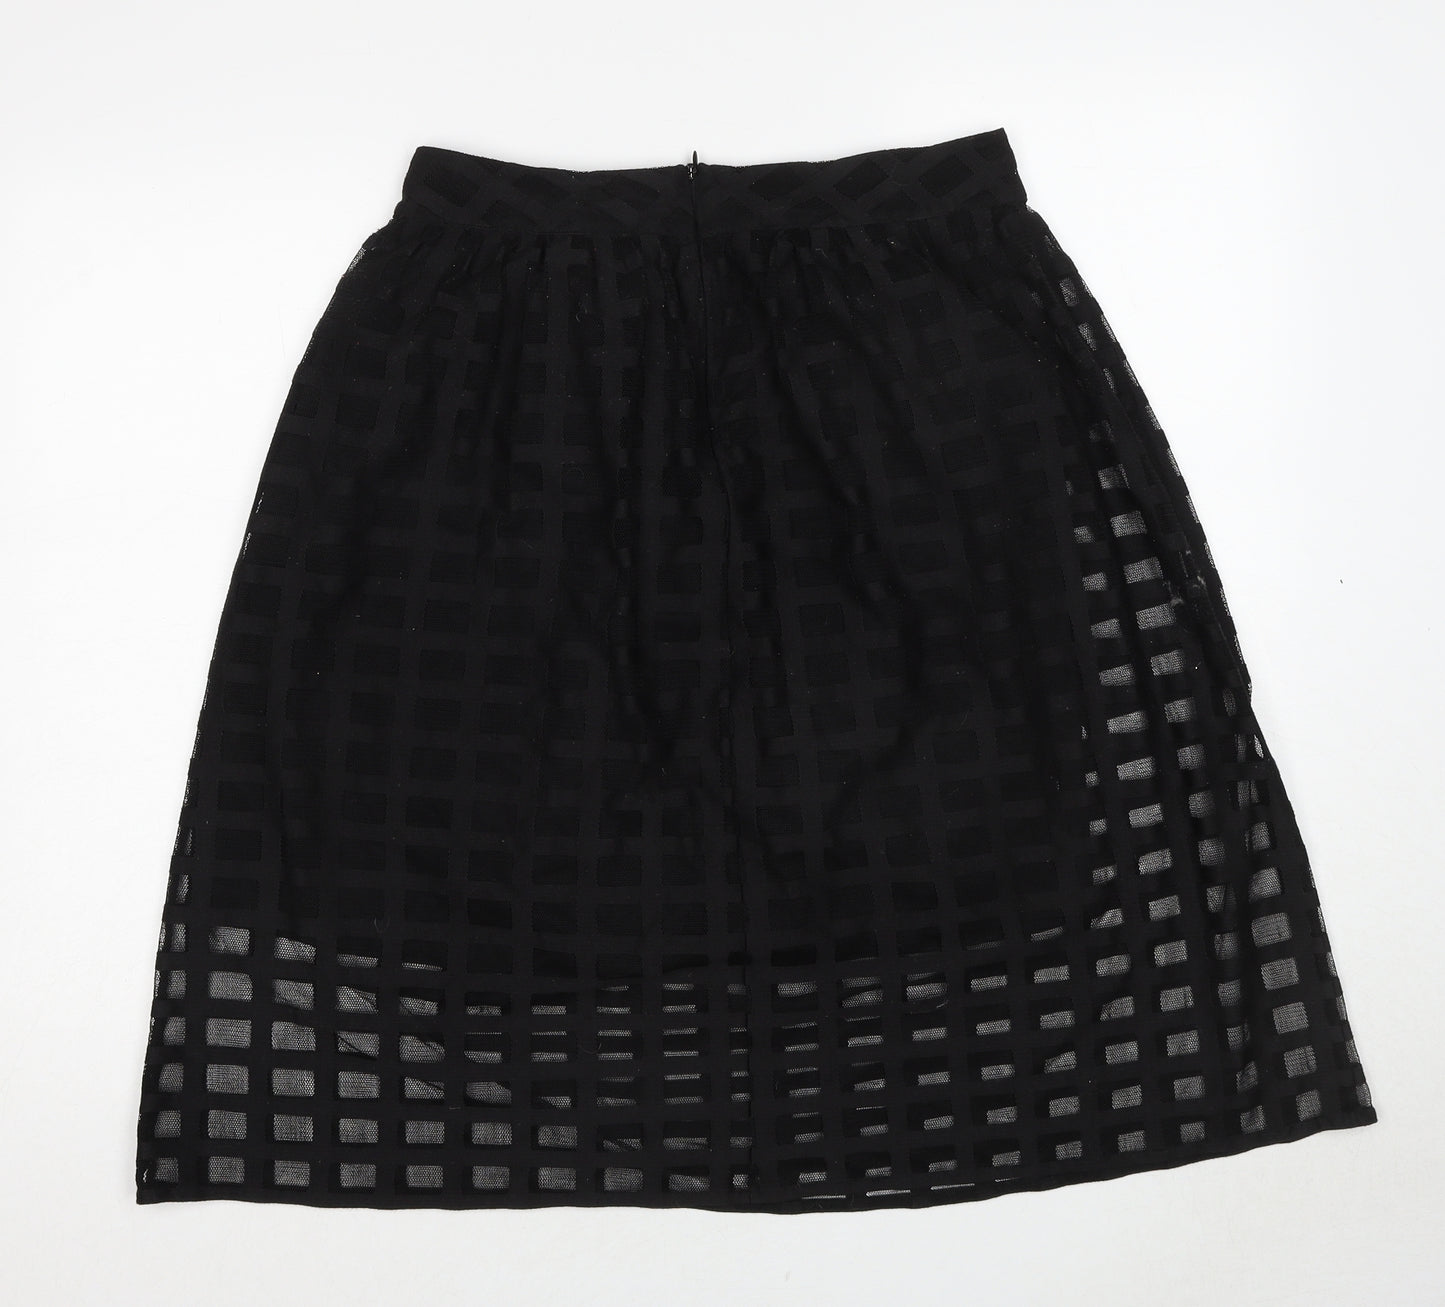 NEXT Womens Black Check Polyester A-Line Skirt Size 10 Zip